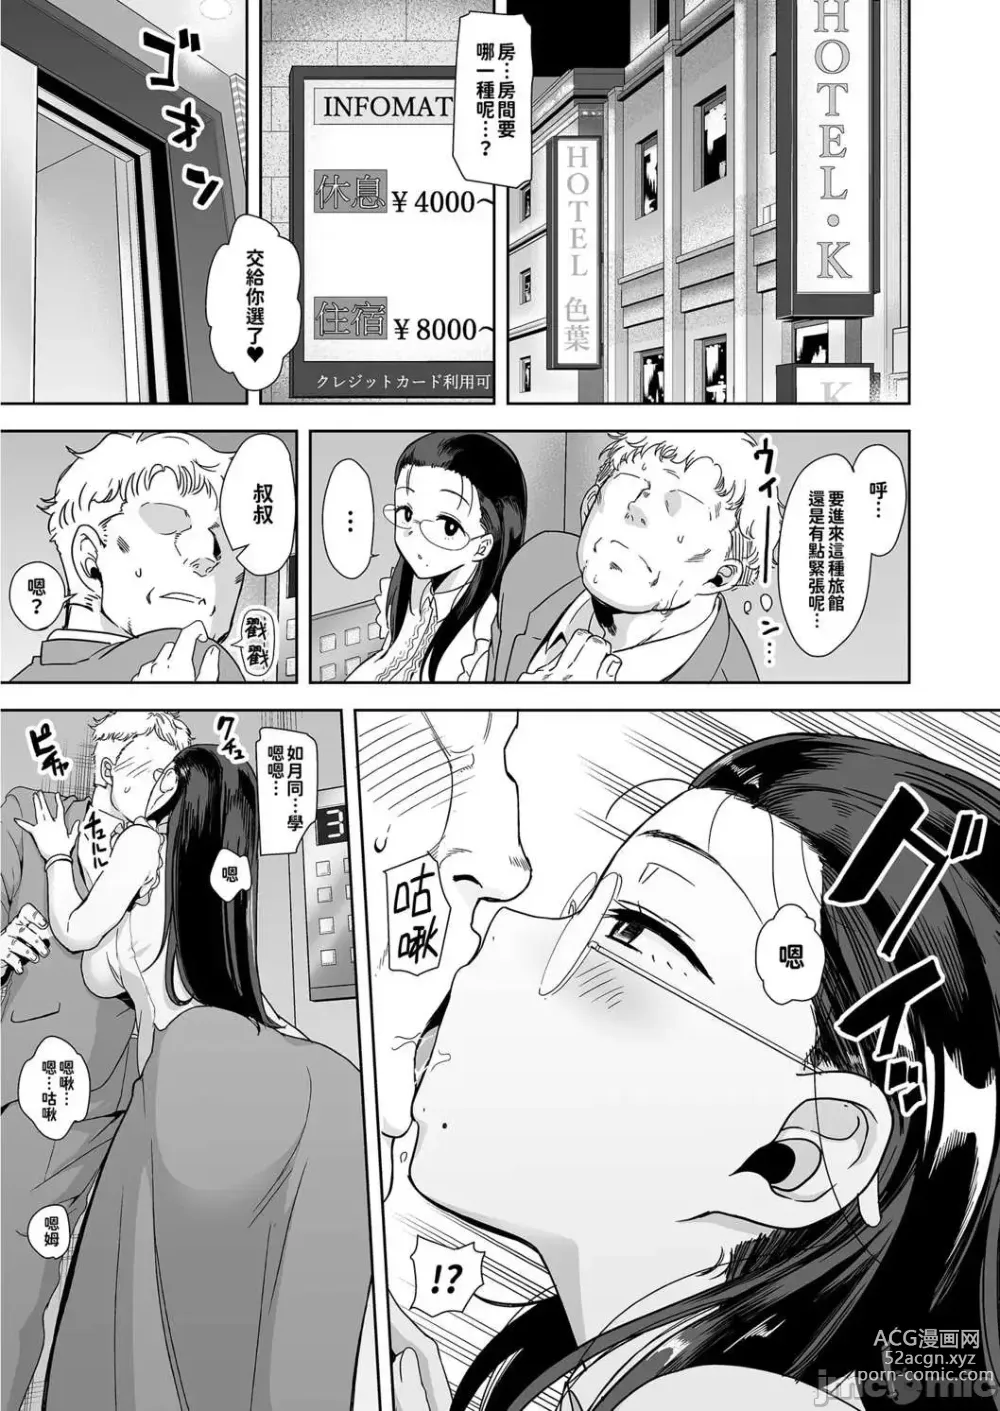 Page 4 of doujinshi Seika Girls Academys Officially Approved Prostitute Man 1 + 2 + 3